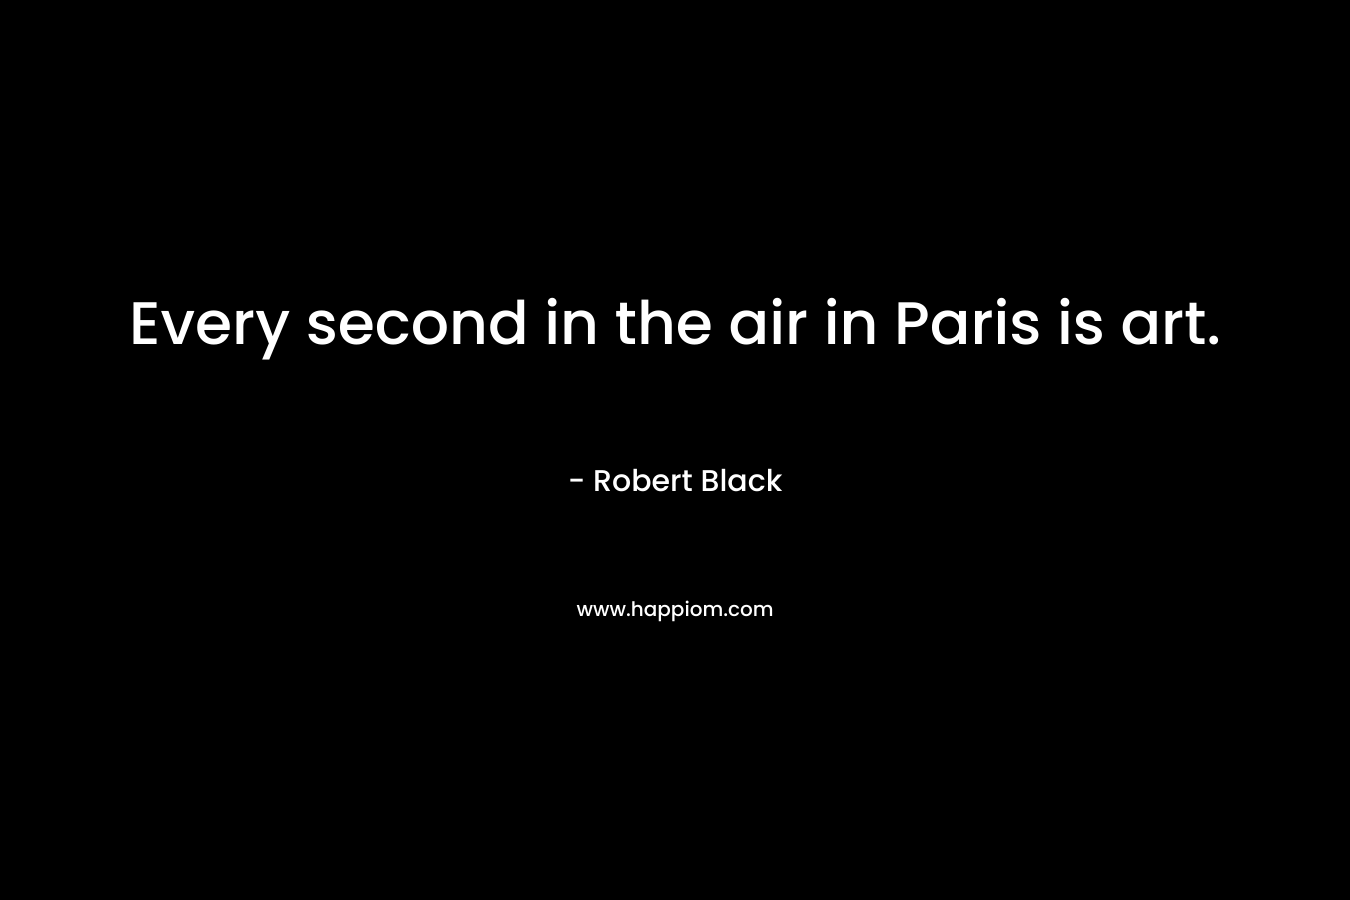 Every second in the air in Paris is art.